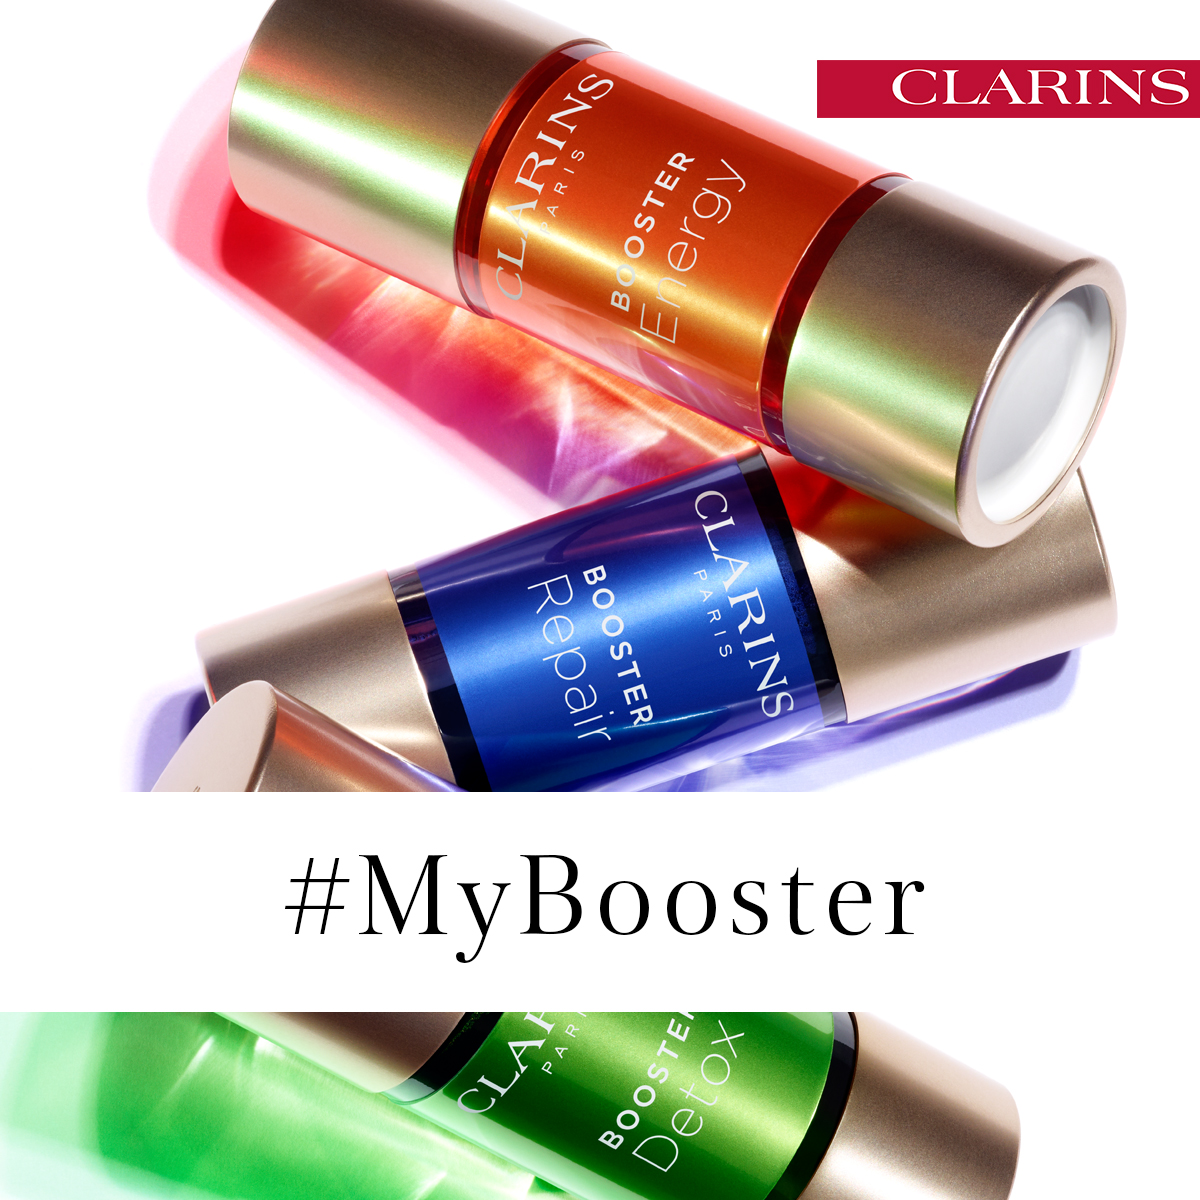 Clarins Skin Boosters